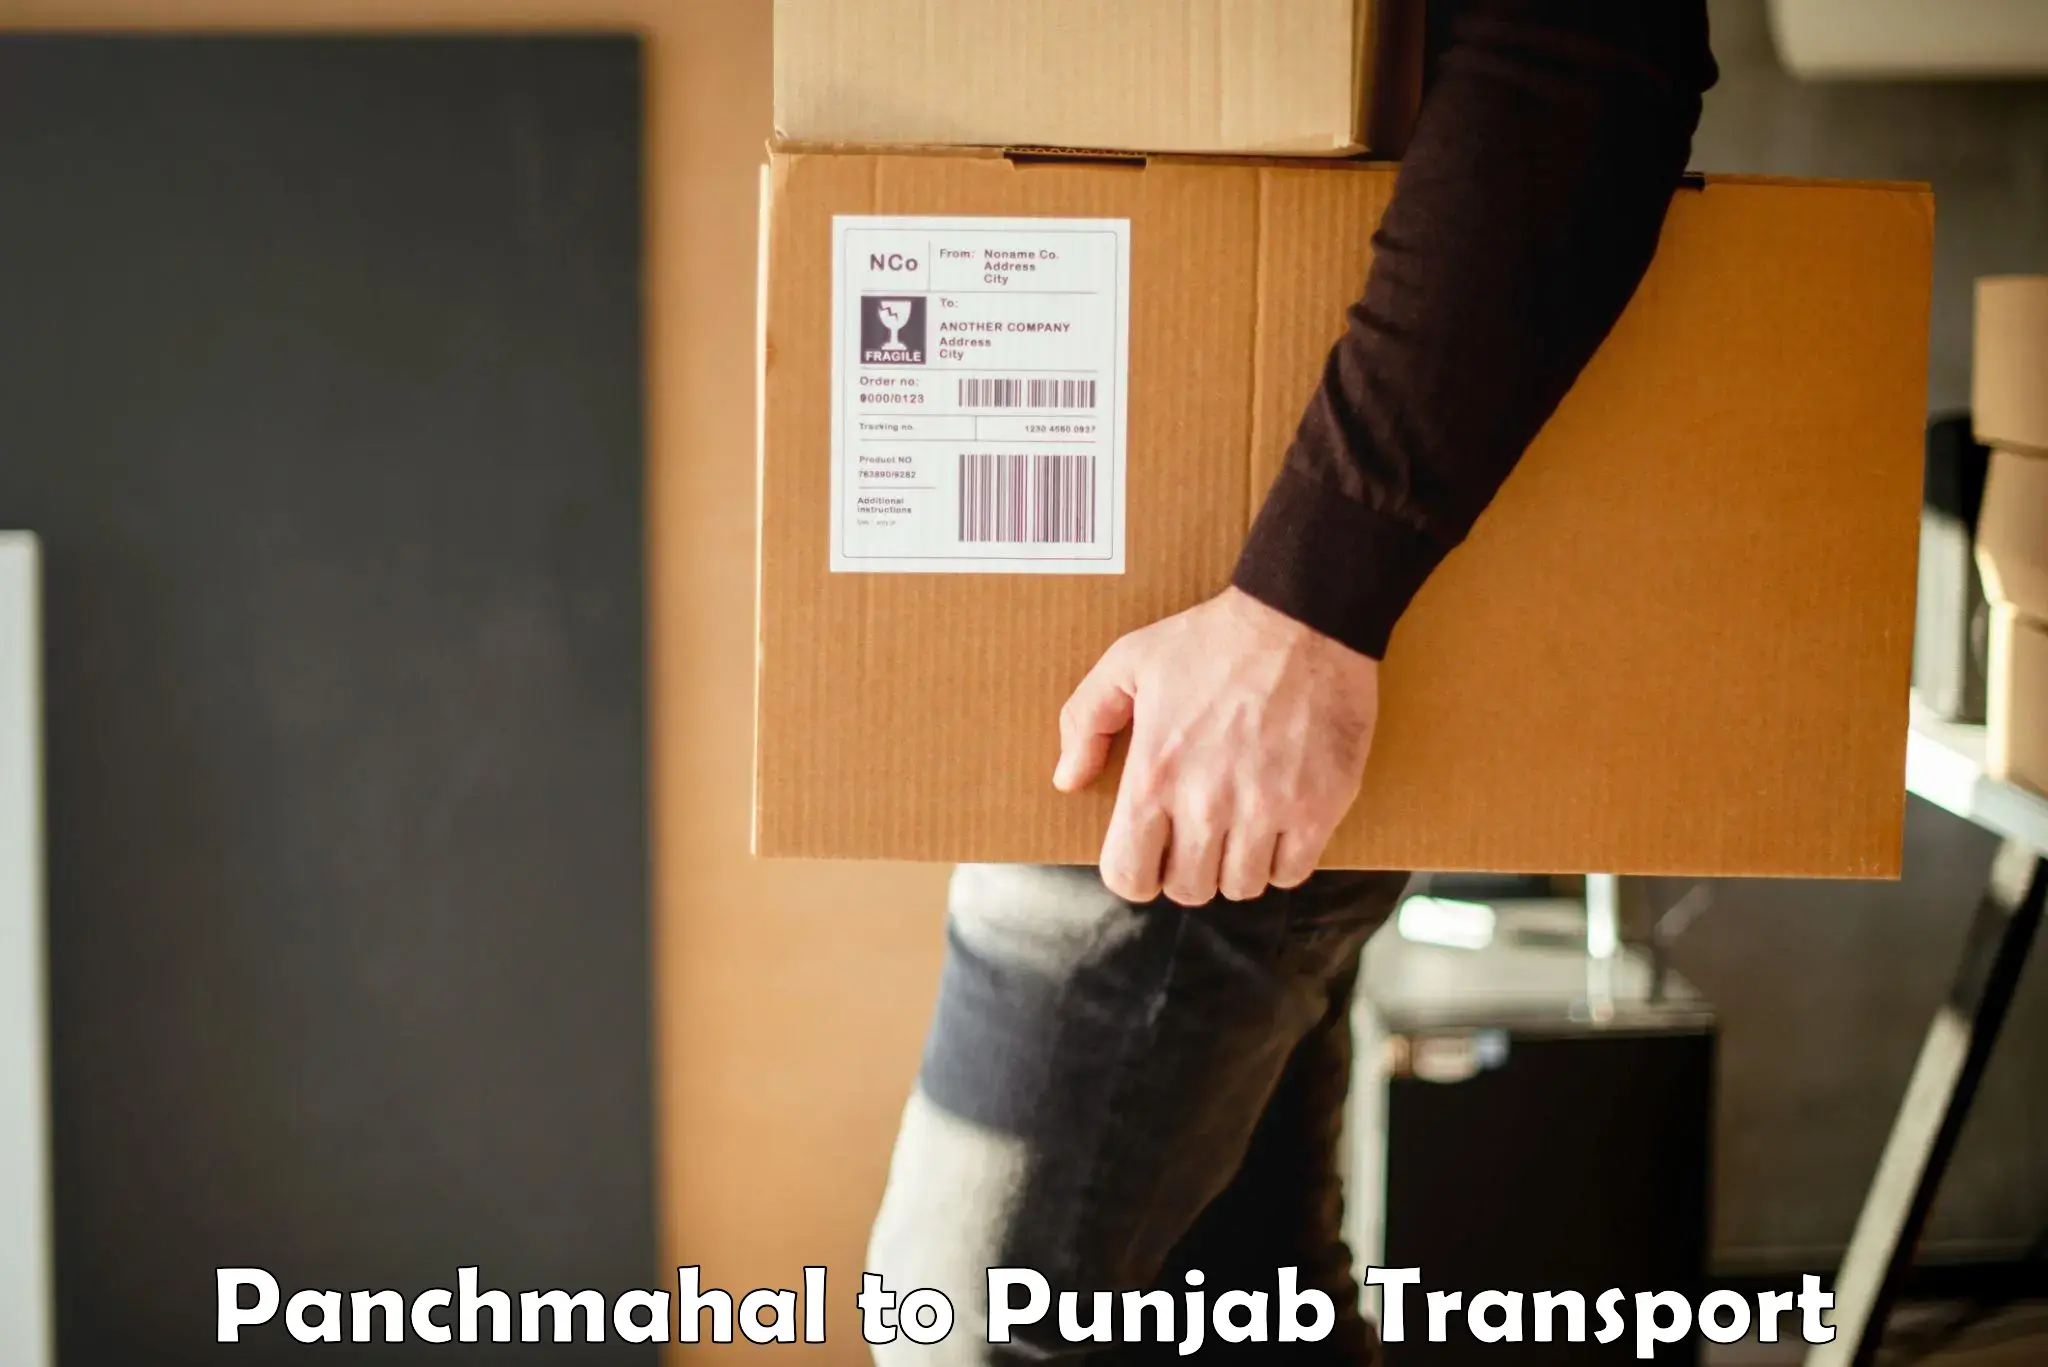 Furniture transport service Panchmahal to Malout